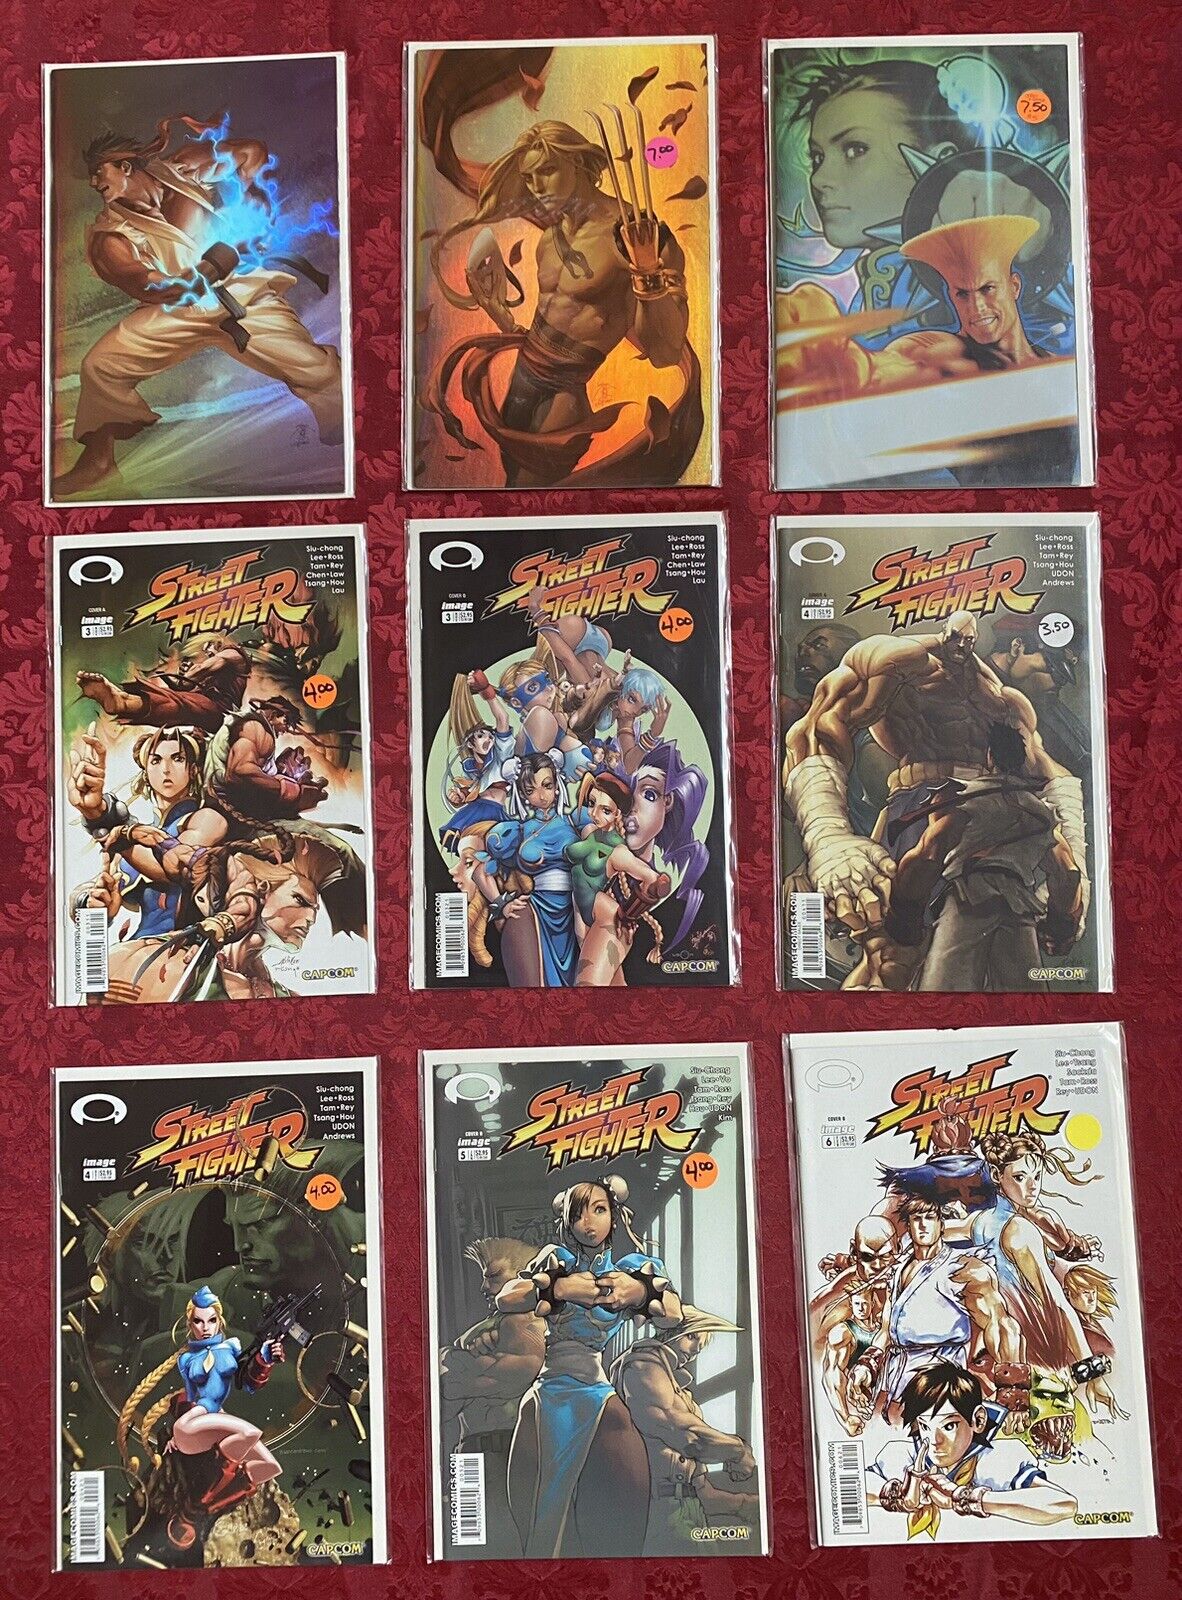 Rare Street Fighter Comic Book Lot - 22 issues Image Udon - U.S. Seller